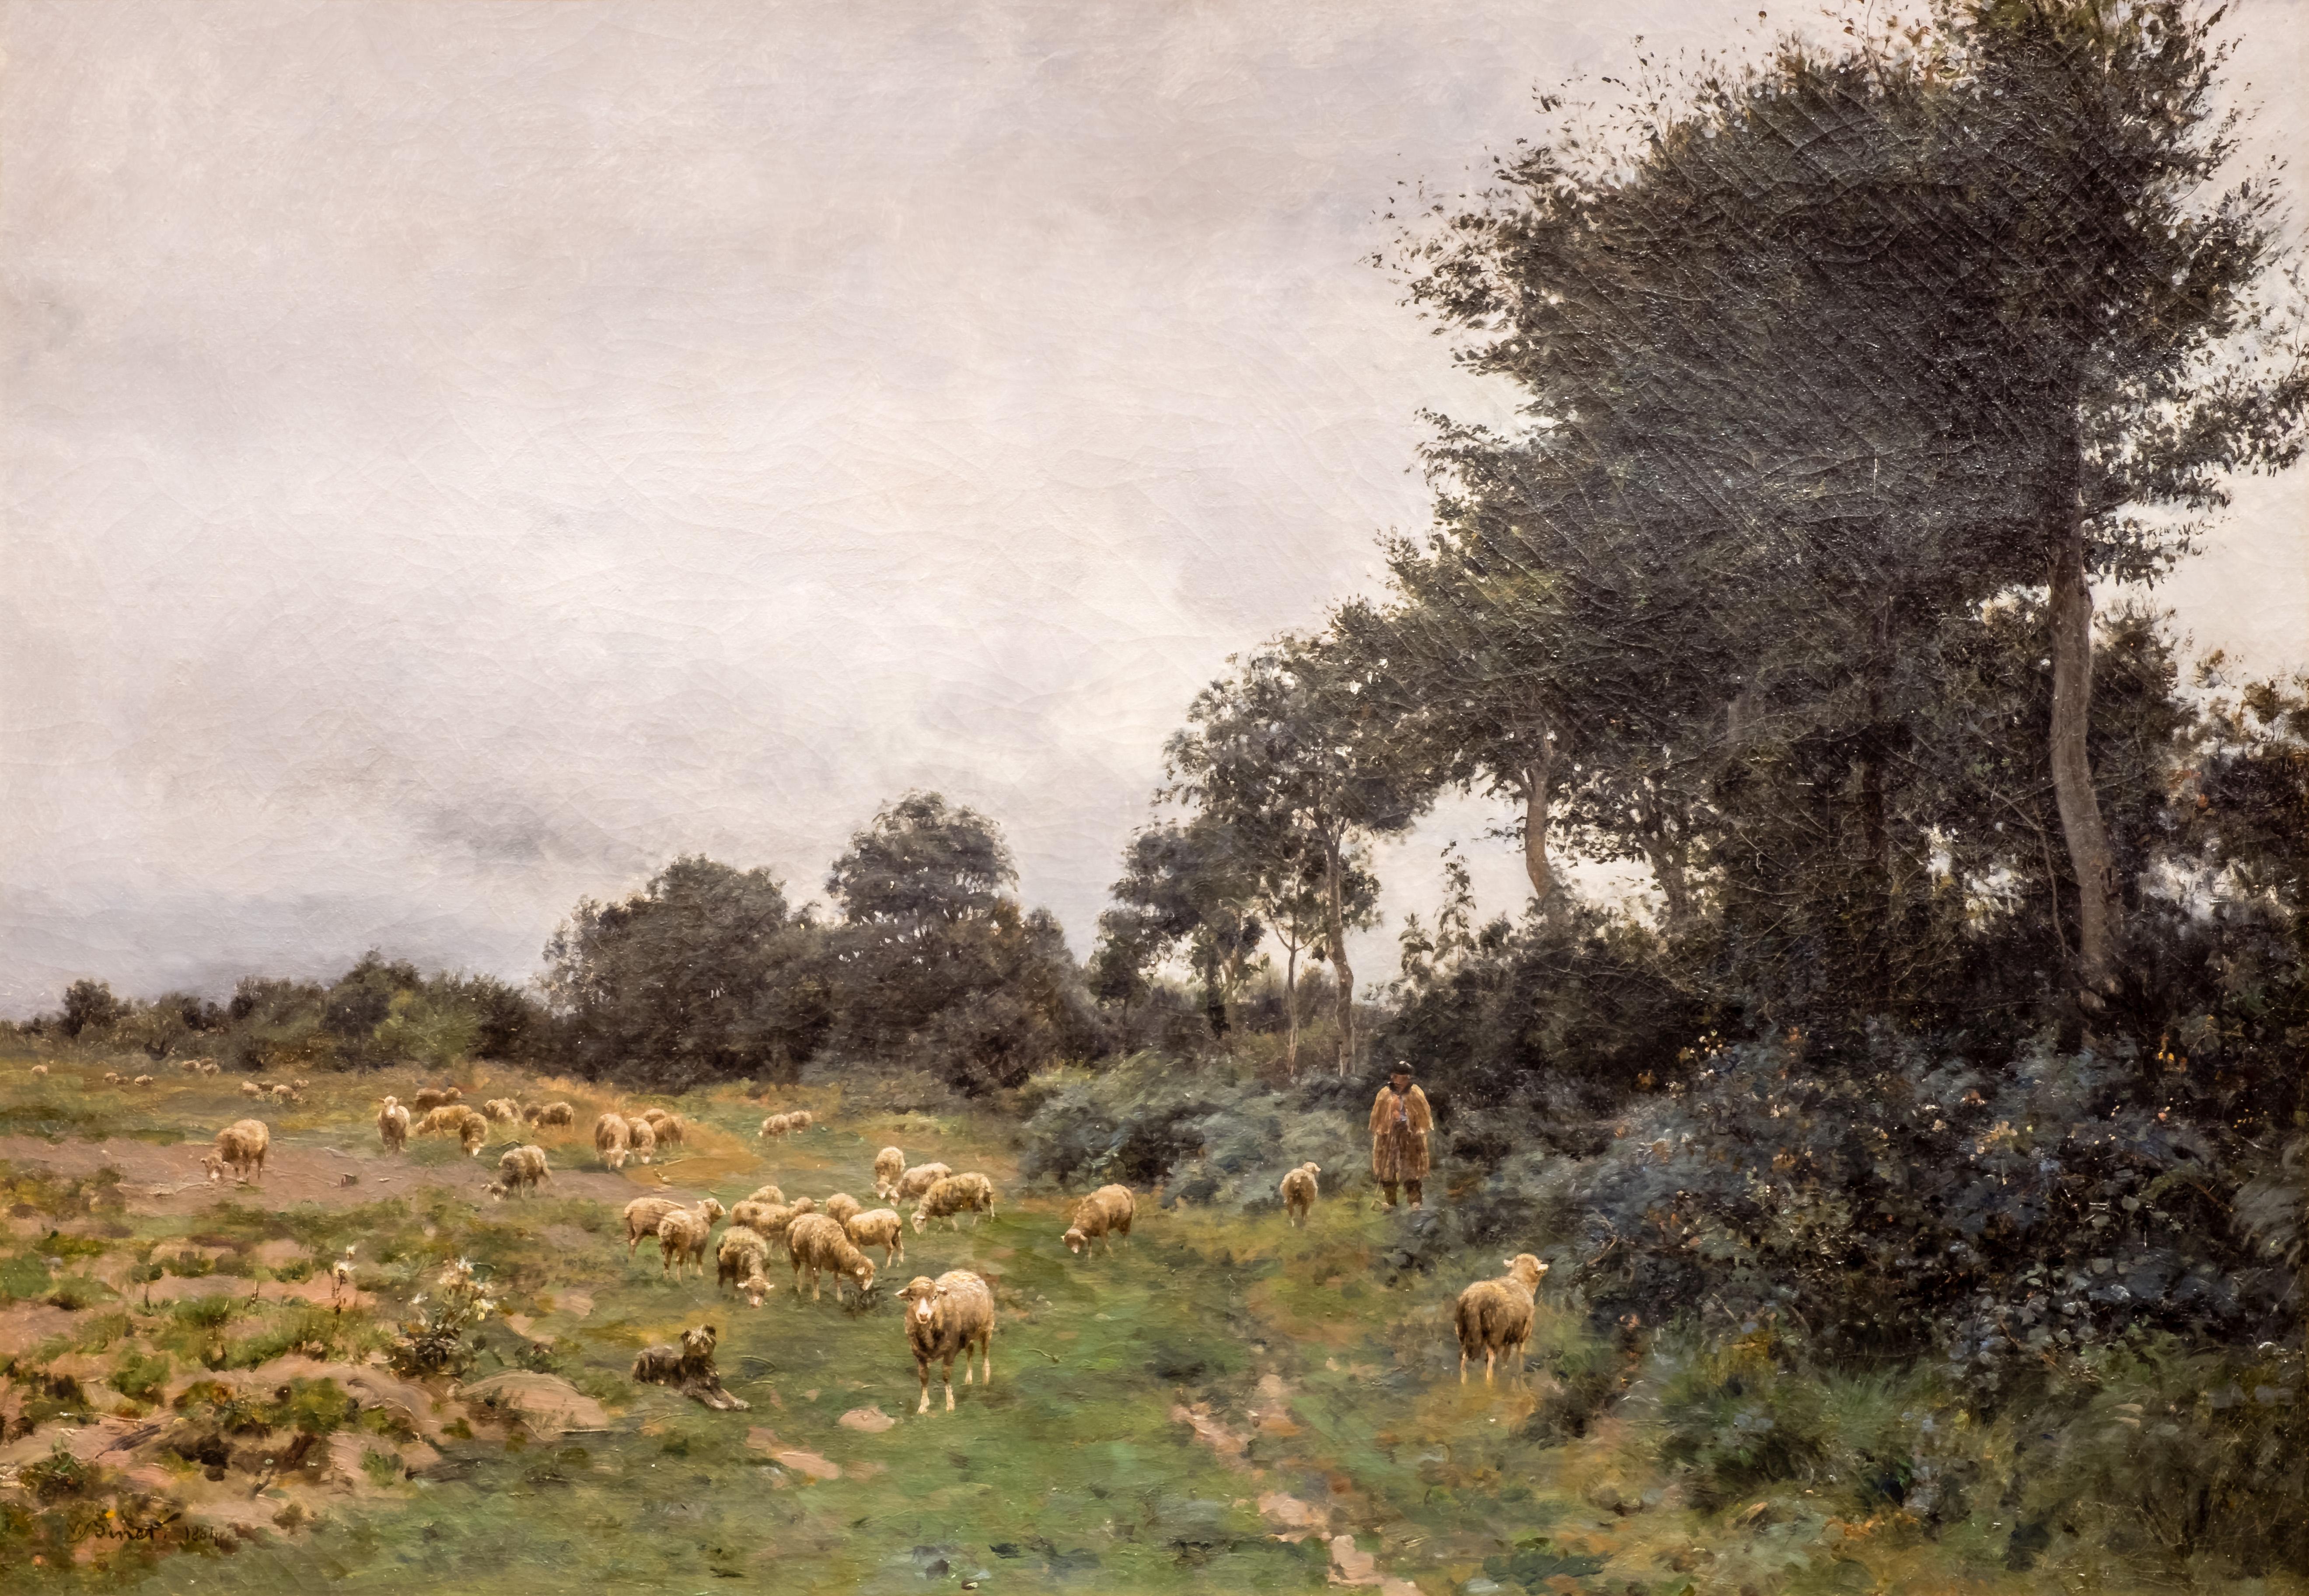 A late 19th century Barbizon School oil on canvas by Victor Jean Baptiste Barthélemy Binet (1849-1924), featuring a rural scene of sheep with a shepherd on a cloudy day.
He exhibited at the 1878 Paris Salon, at the Royal Acadmy in London in 1886